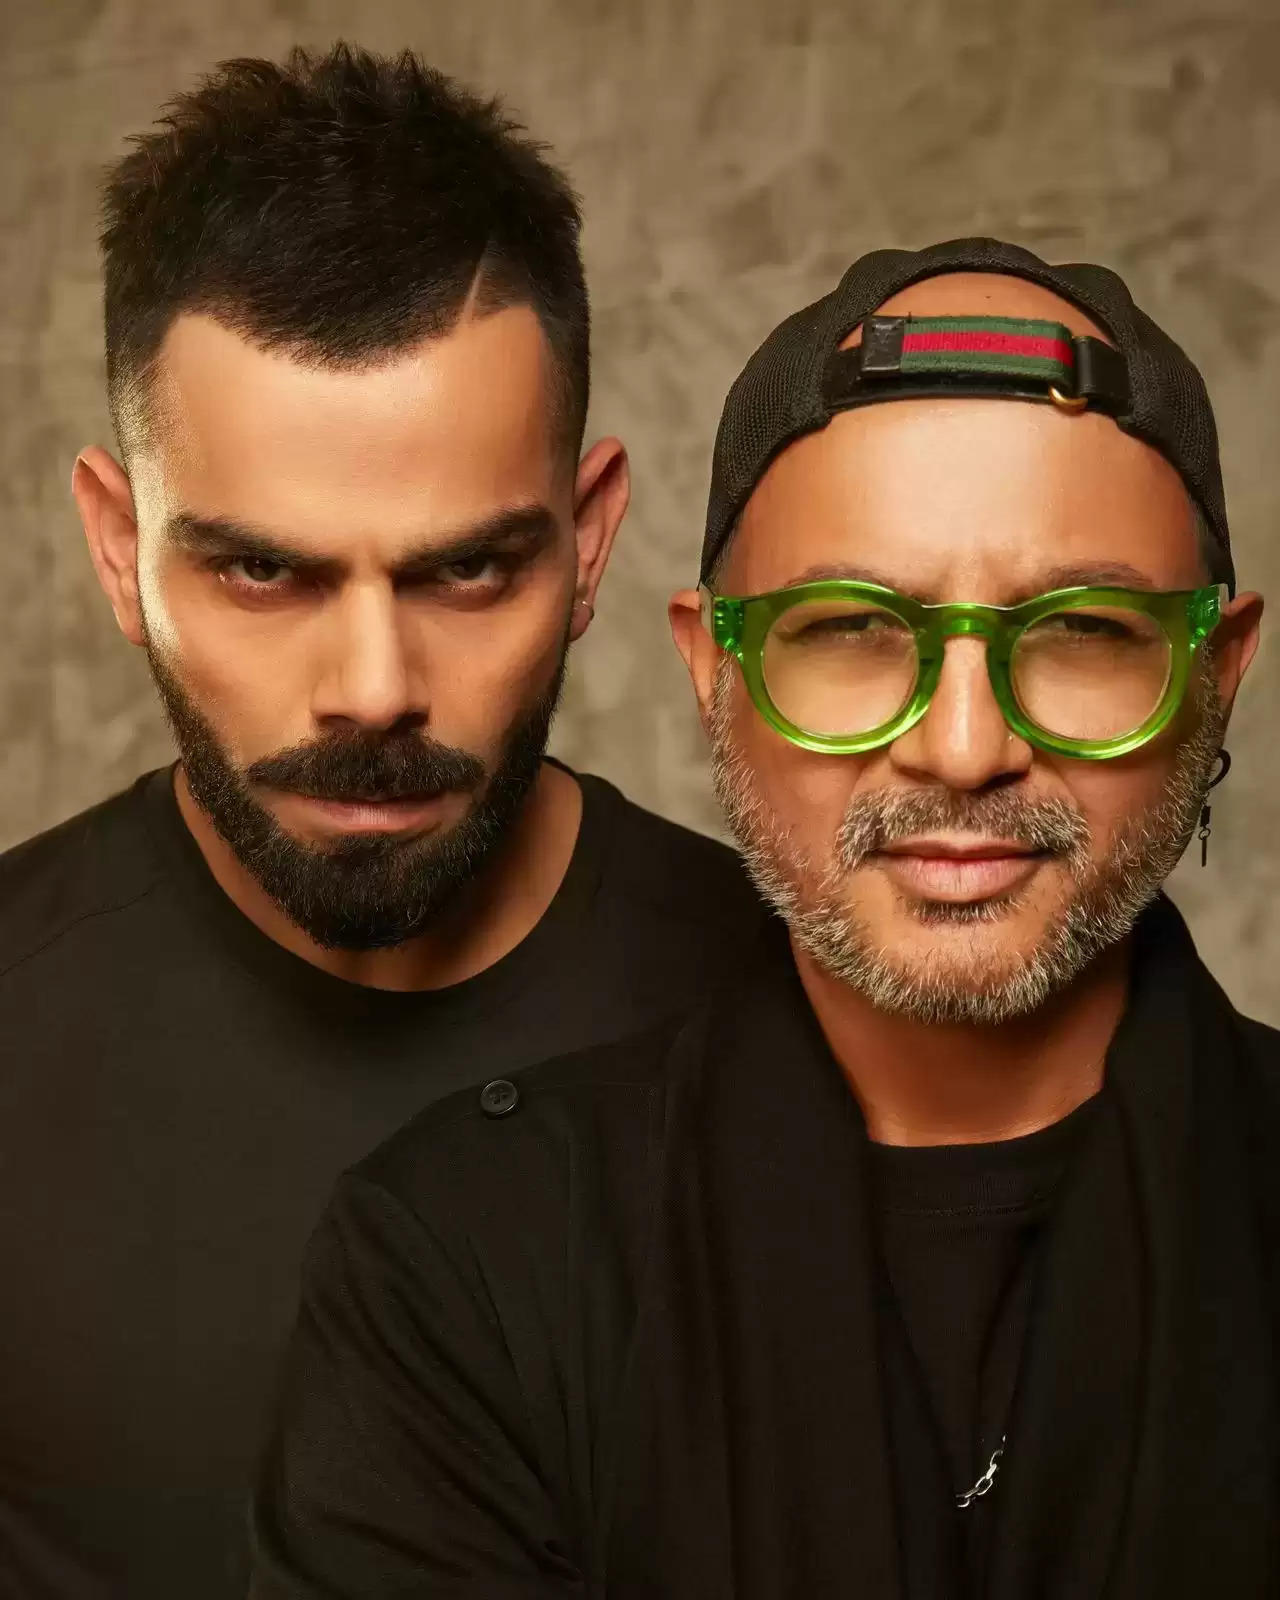 Hairdresser Aalim Hakim gives Virat Kohli a edgy and grungy look ahead of the crucial match today and King Kohli looks irresistible